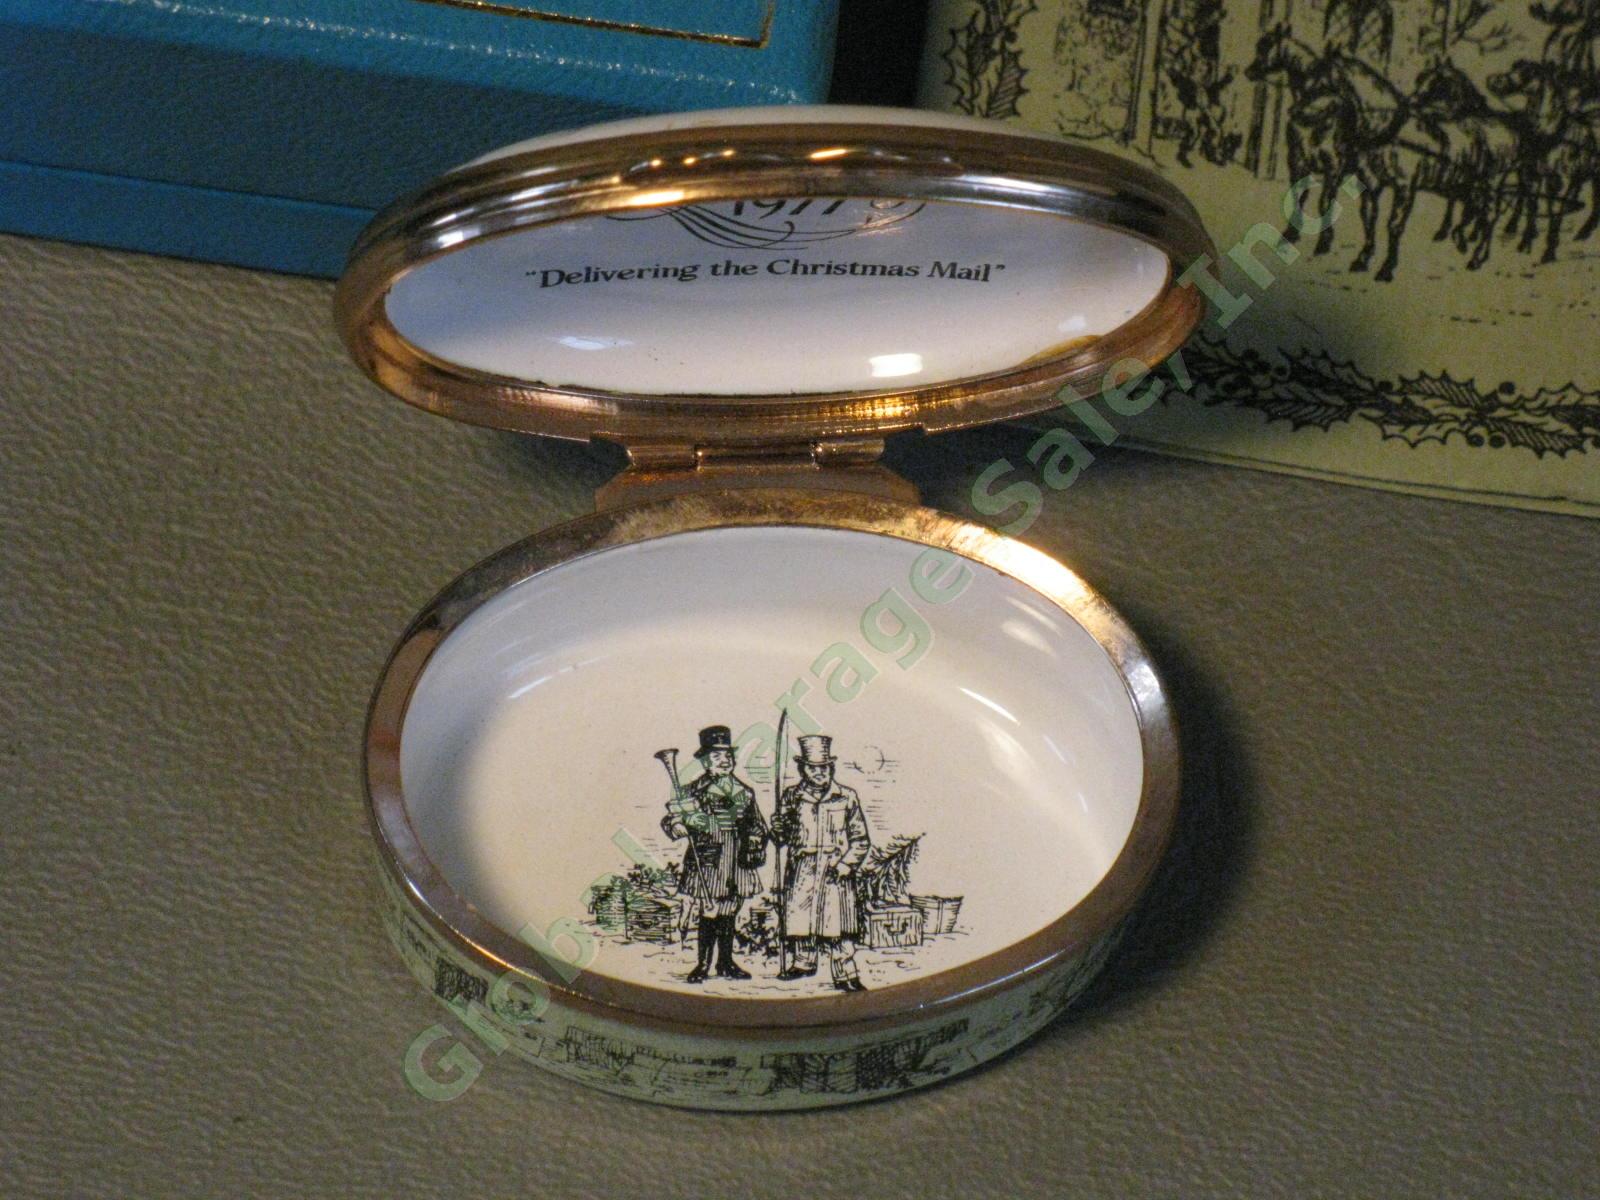 Limited Edition 1977 Halcyon Days Delivering Christmas Mail Enamel Trinket Box 7